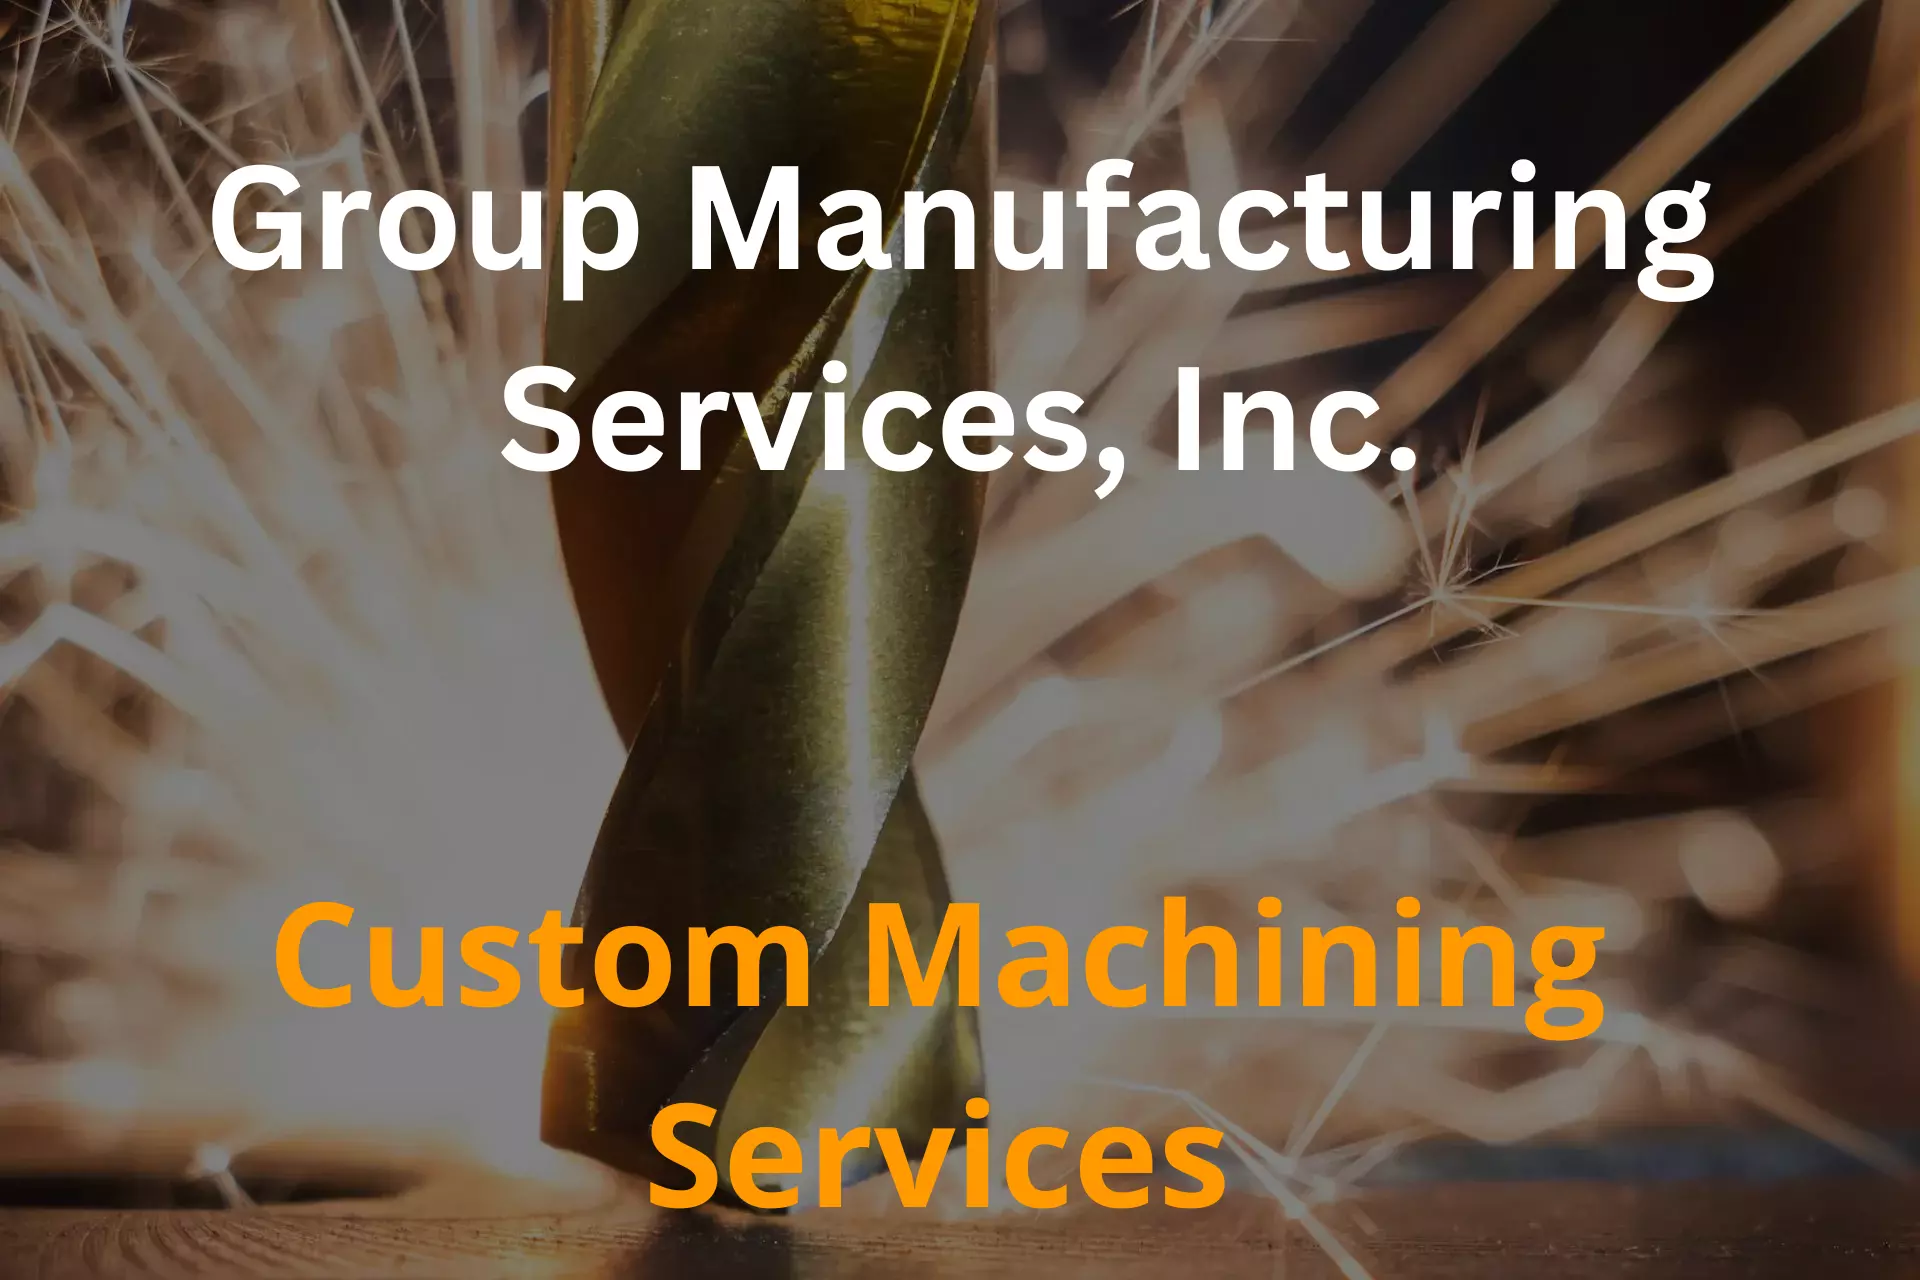 Custom Machining Services | Group Manufacturing Services, Inc.